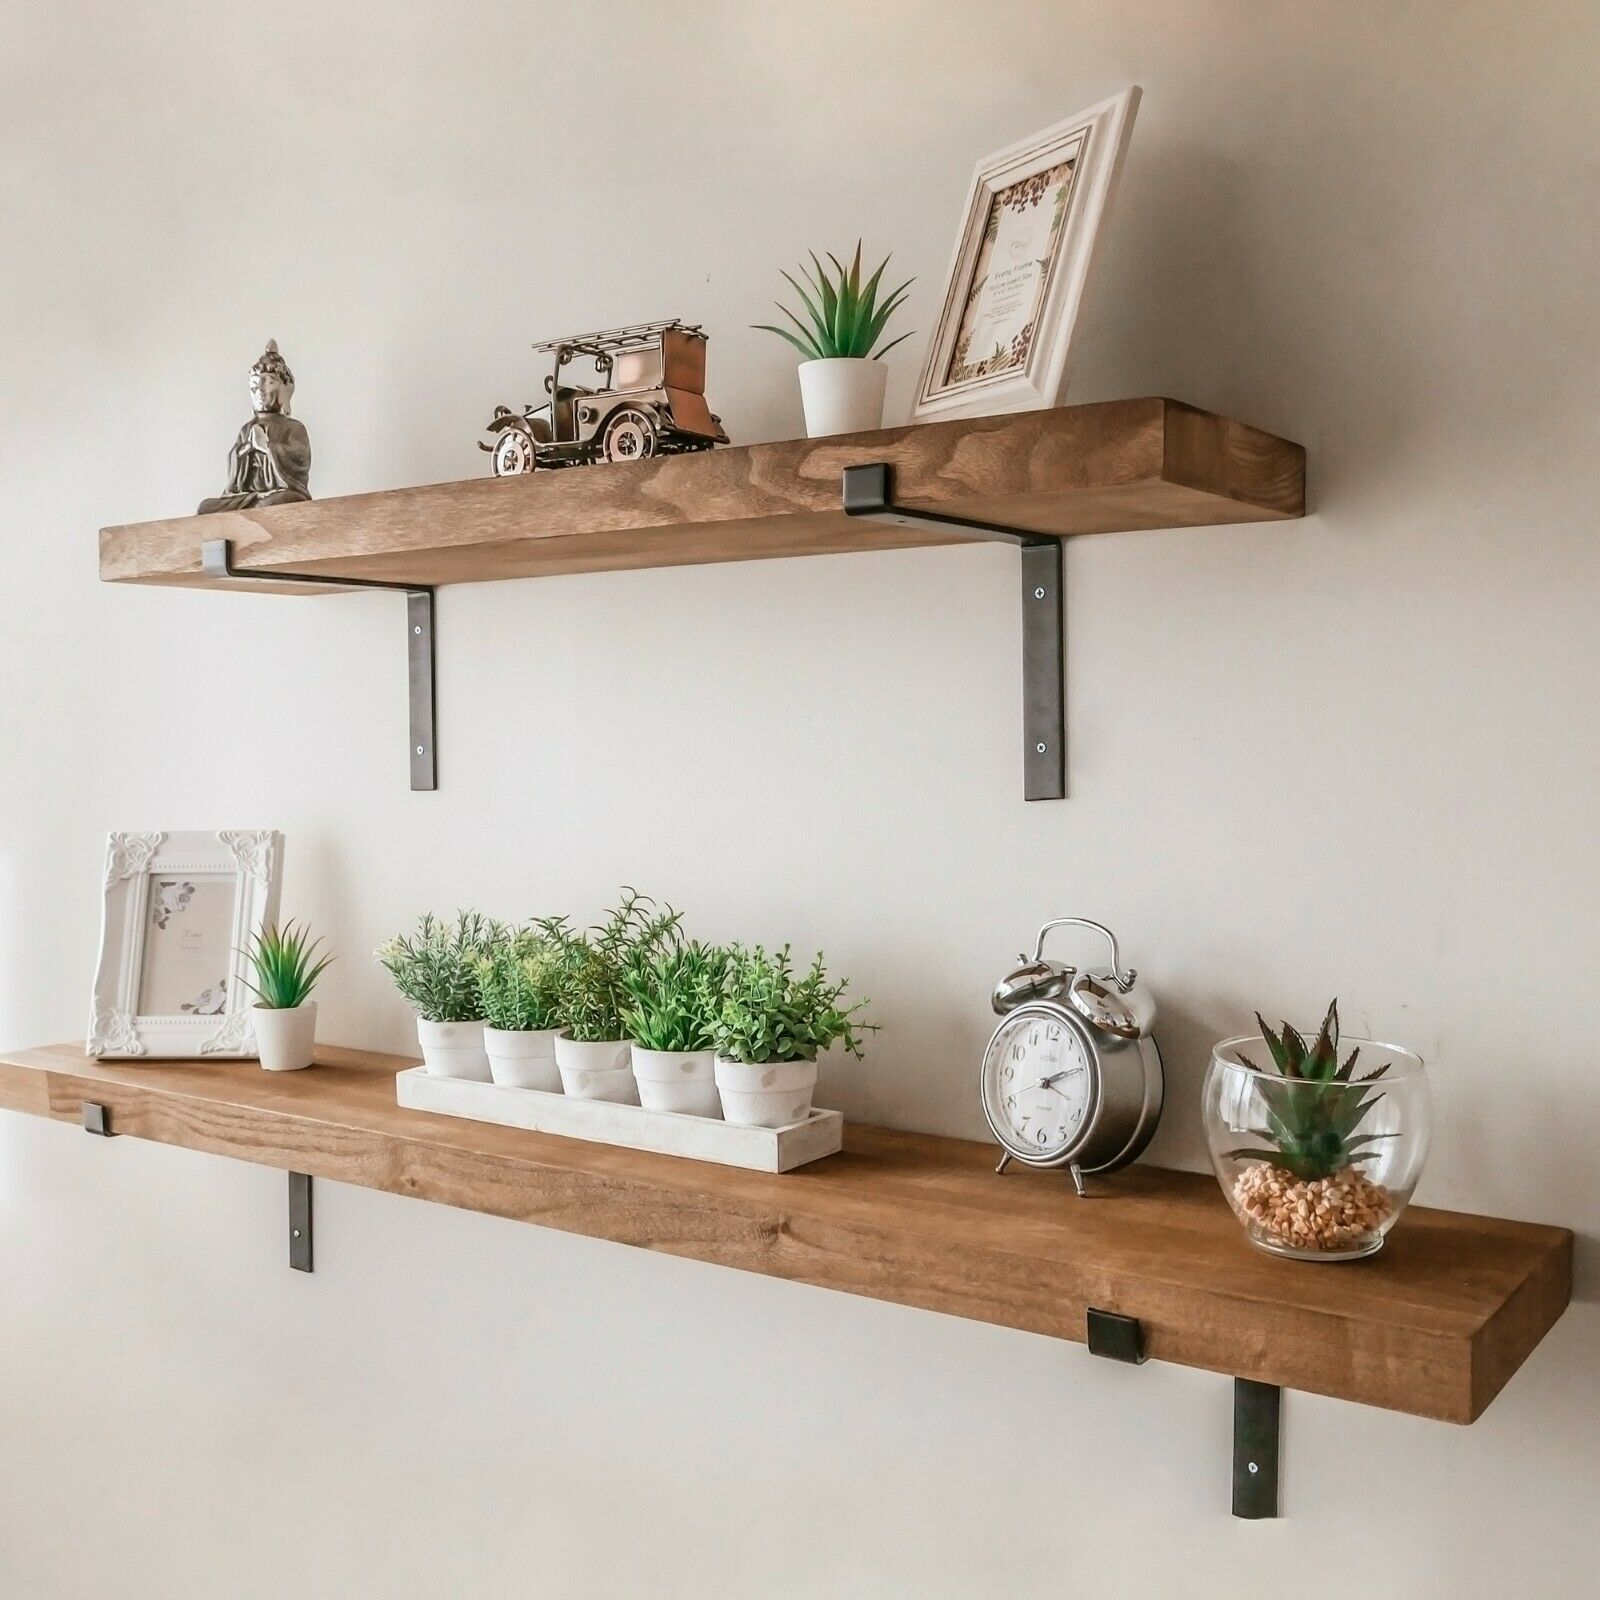 Rustic OAK Floating Shelves – Identify The Truth About Them